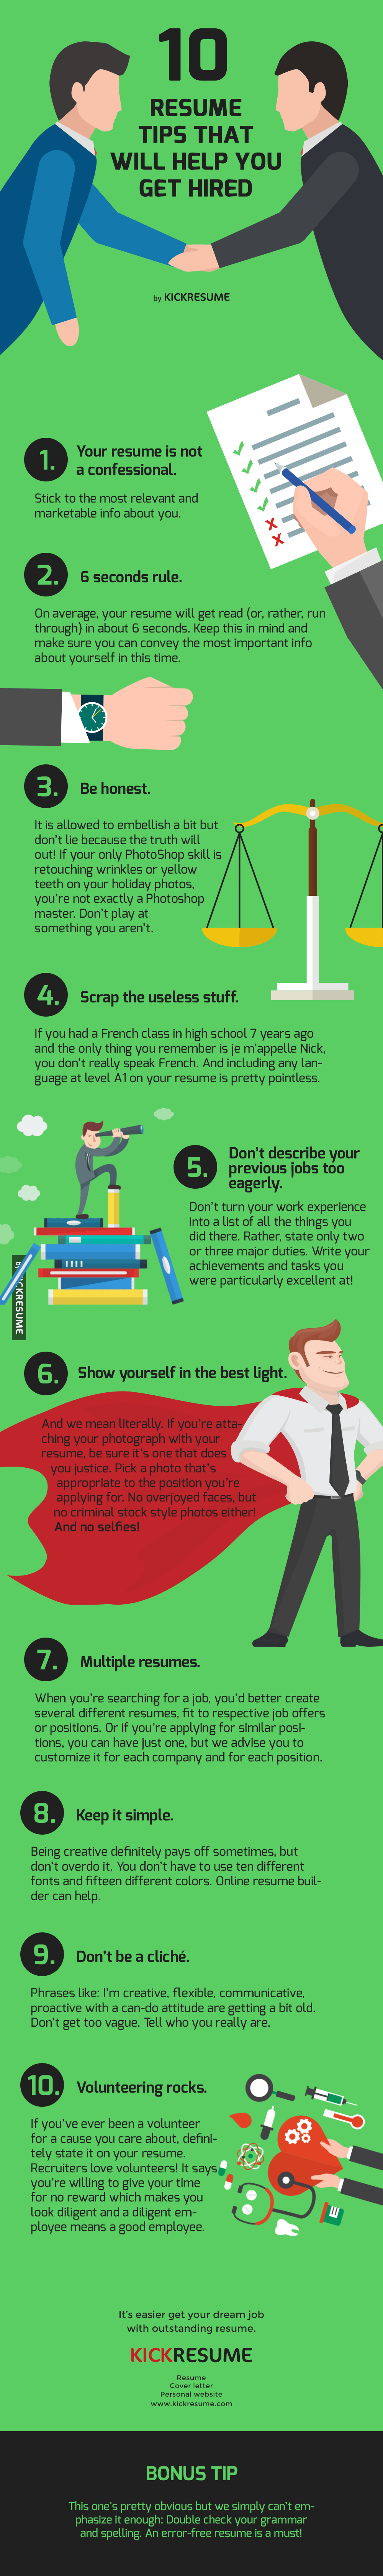 10-interview-tips